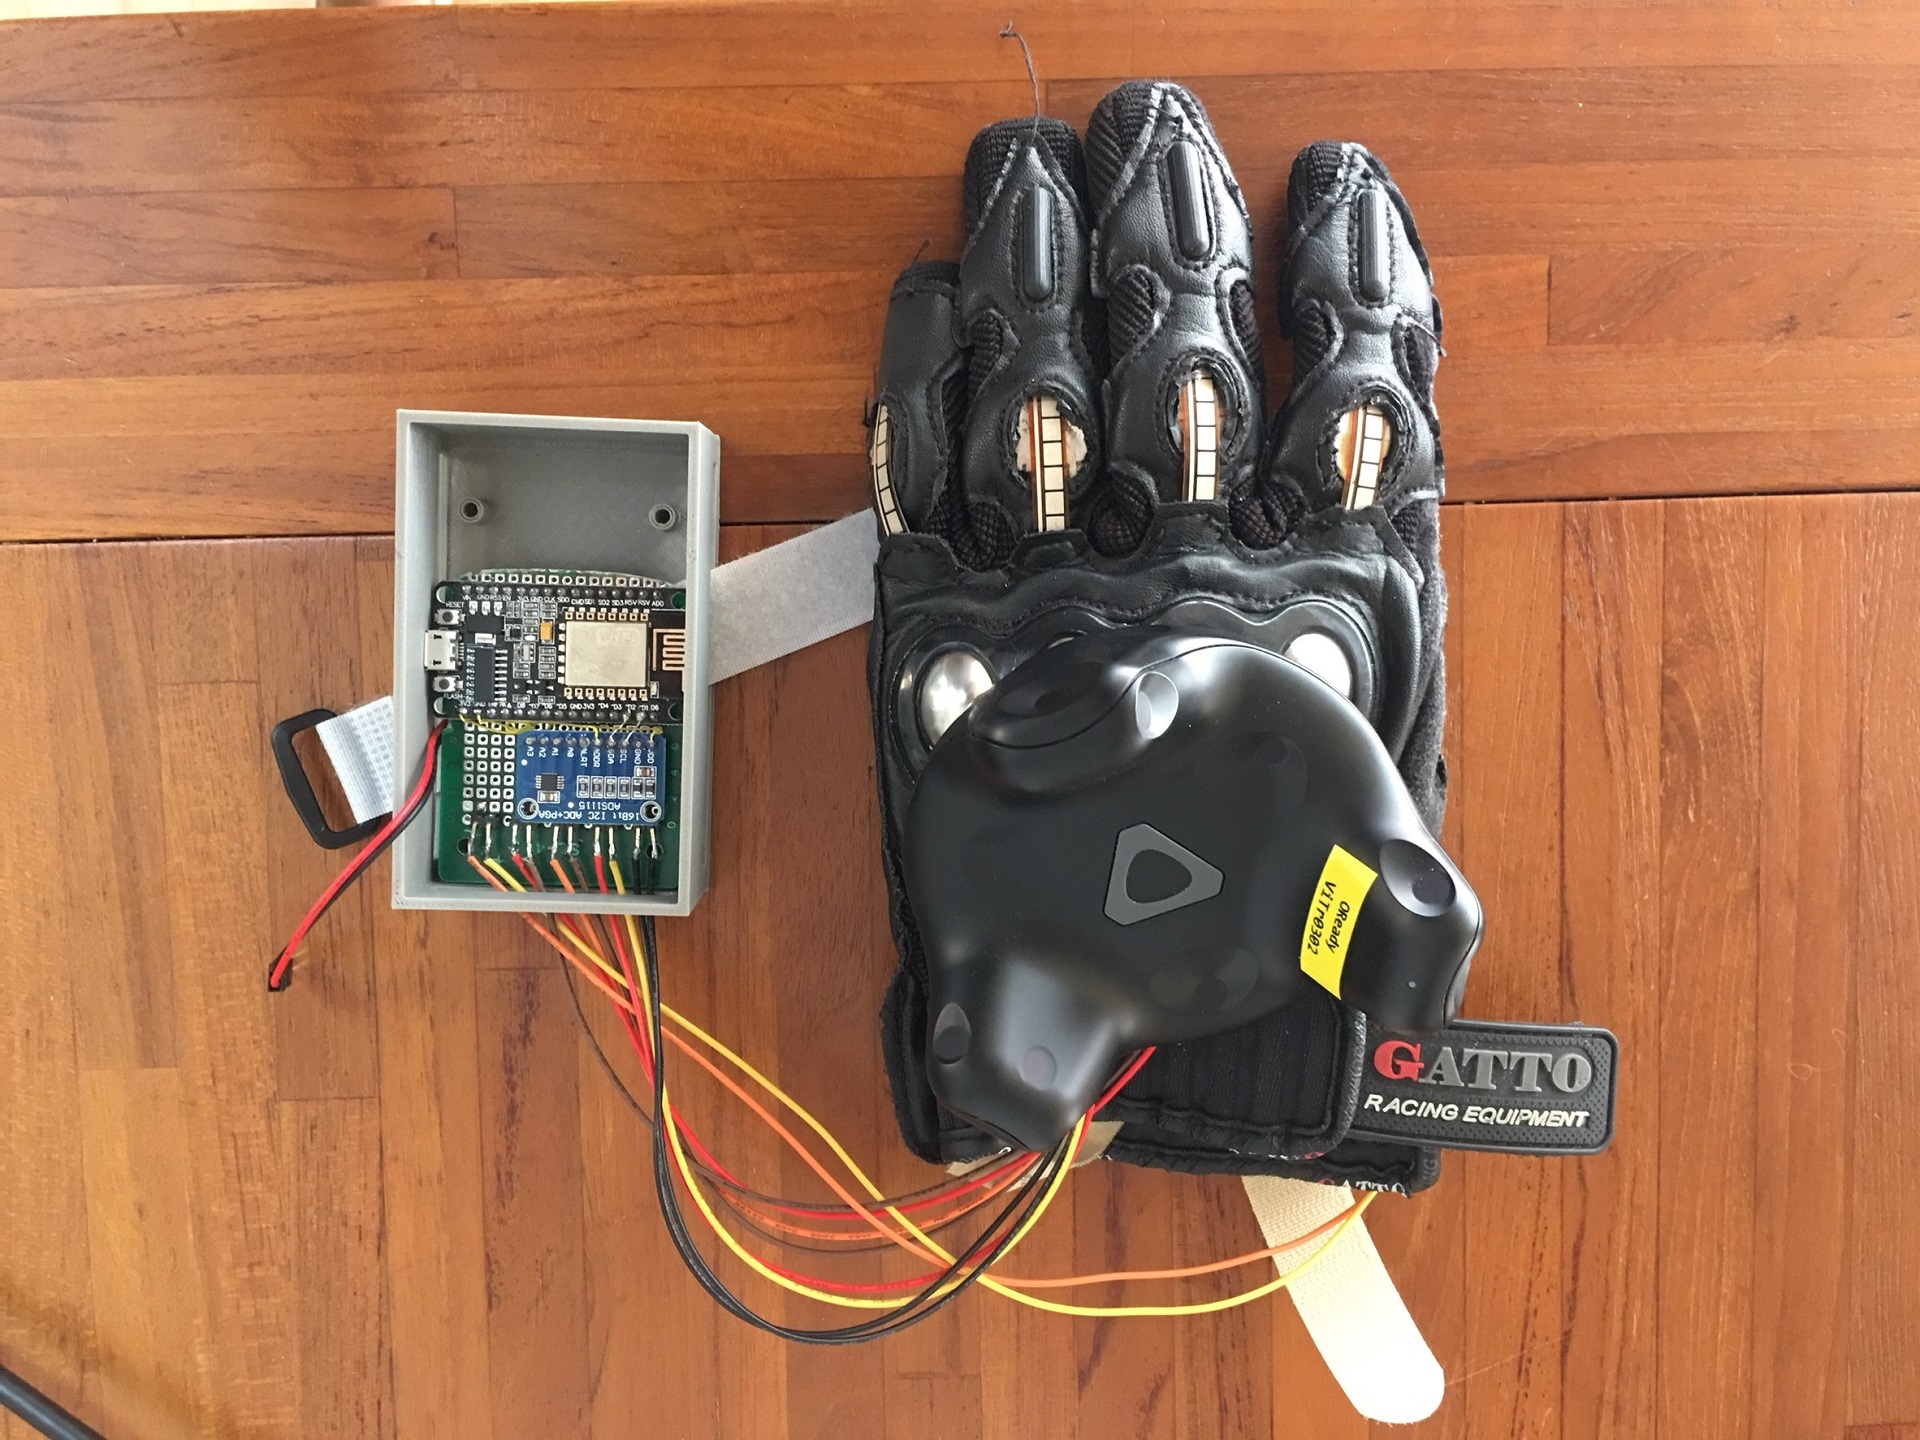 Connected to the hardware EVB (ESP8266+Arduino adopted), integrated with motorcycle gloves available from the market